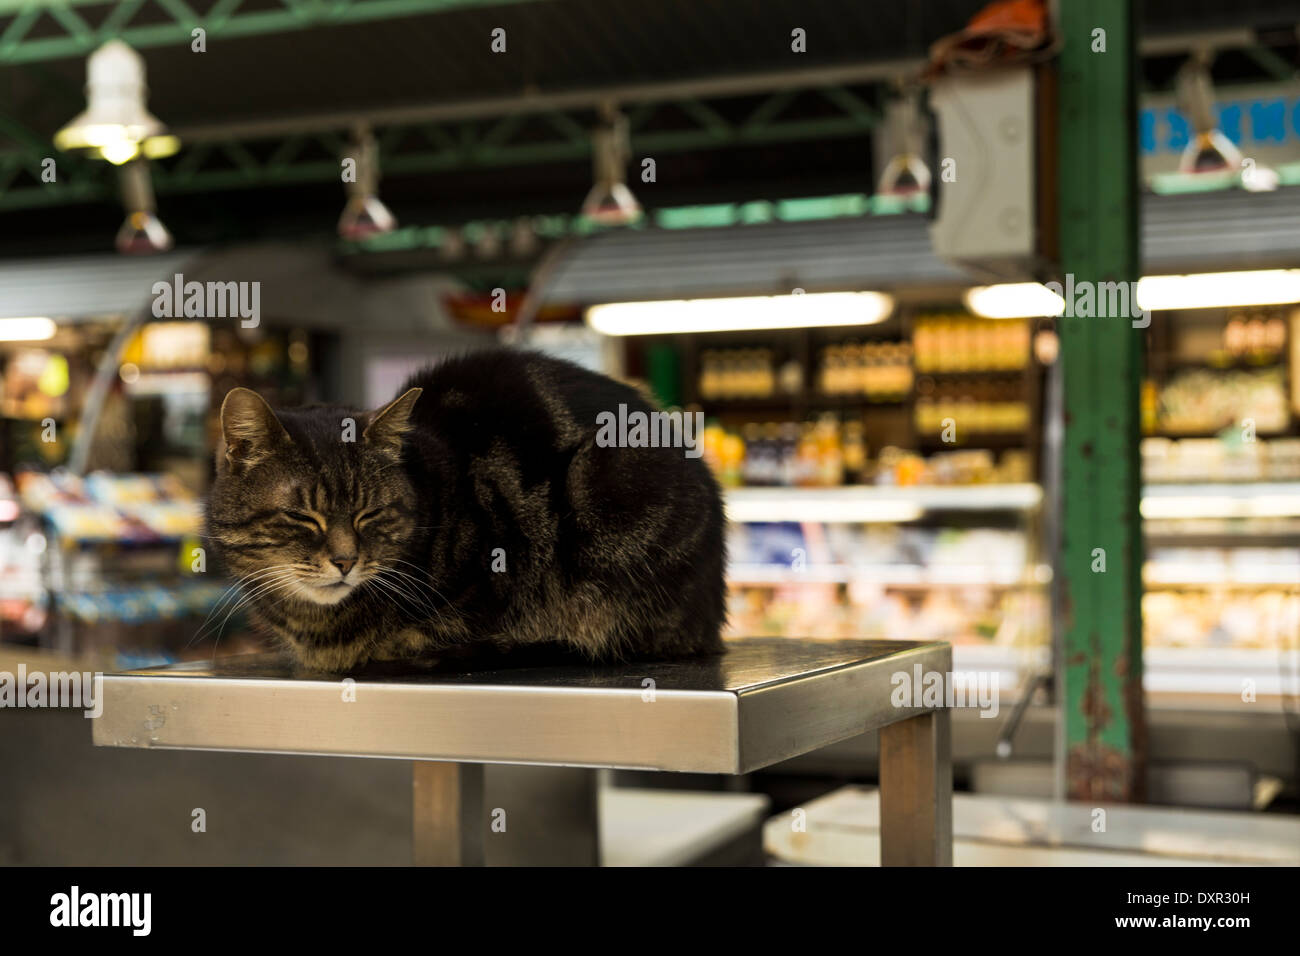 Cat sleeping on a scale in a stall of Enfants Rouges Market, Paris, France Stock Photo